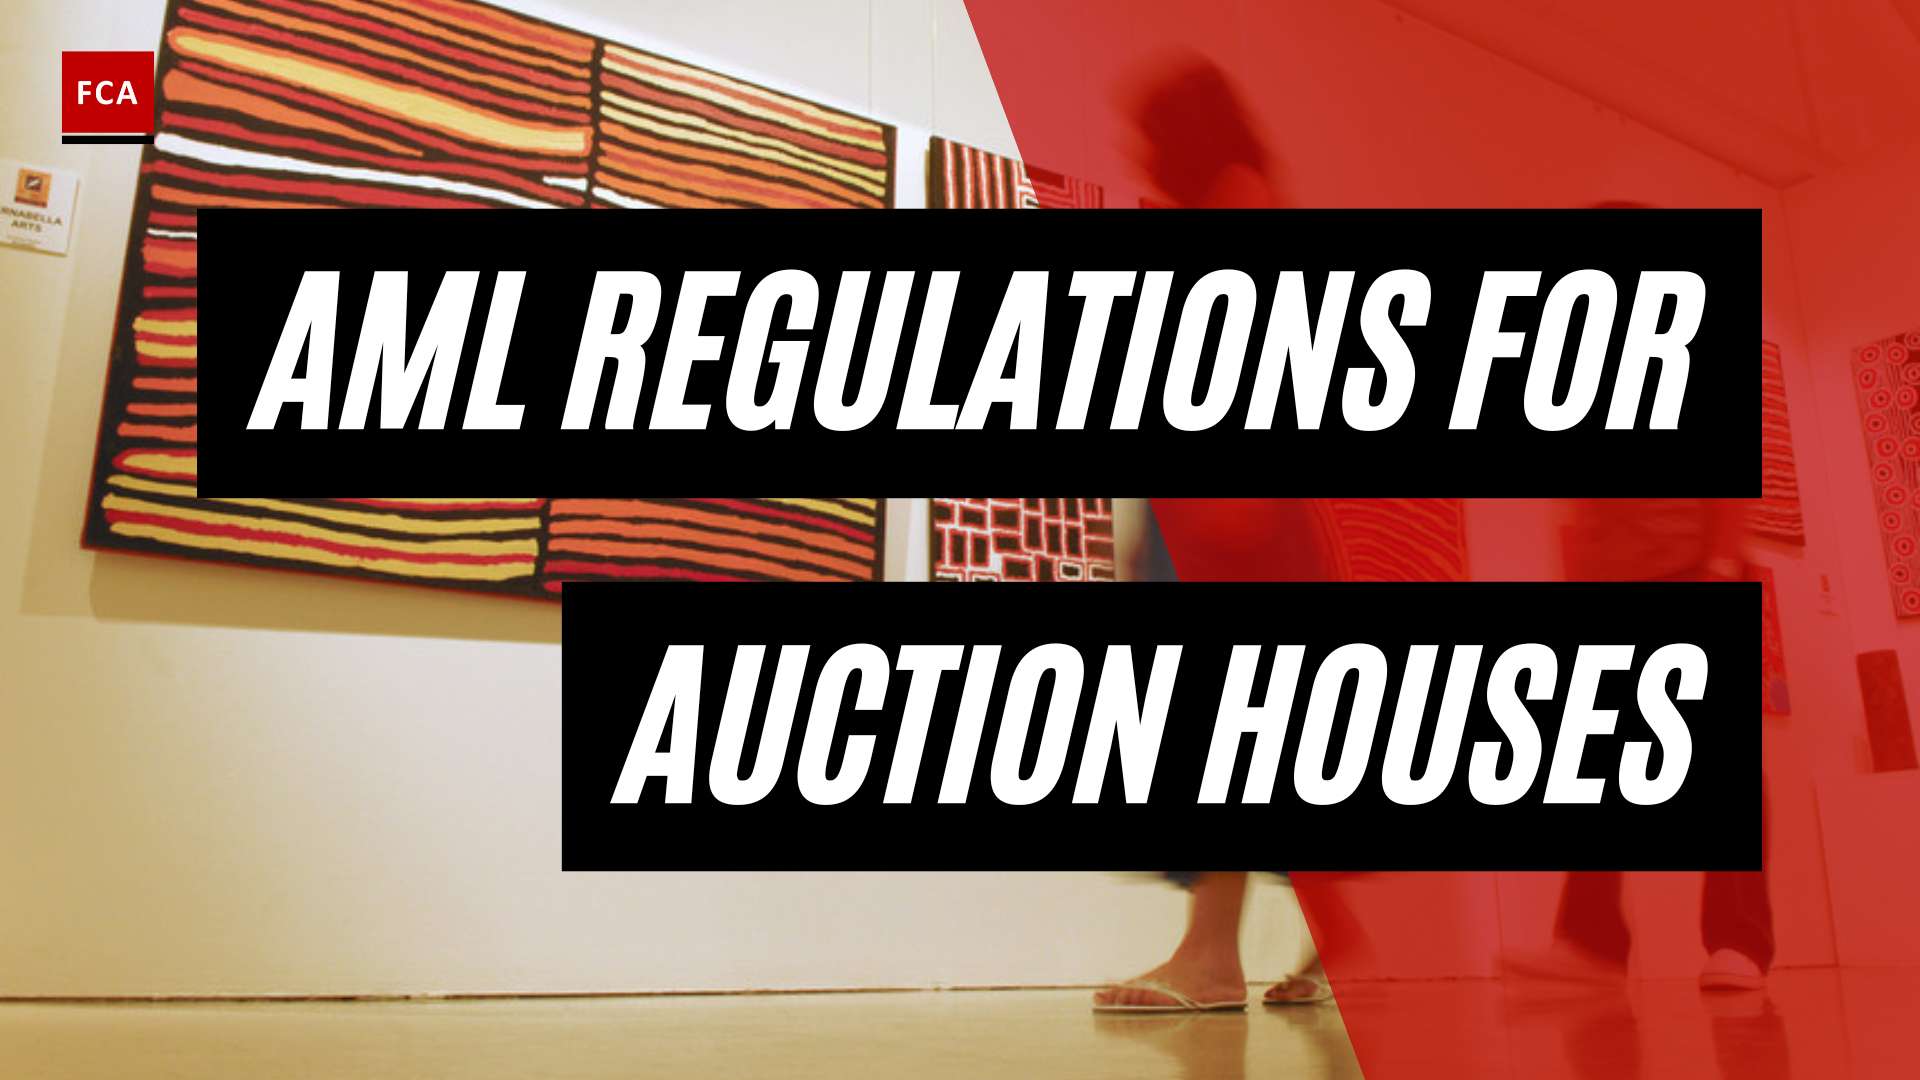 The Ultimate Guide To Aml Regulations For Auction Houses